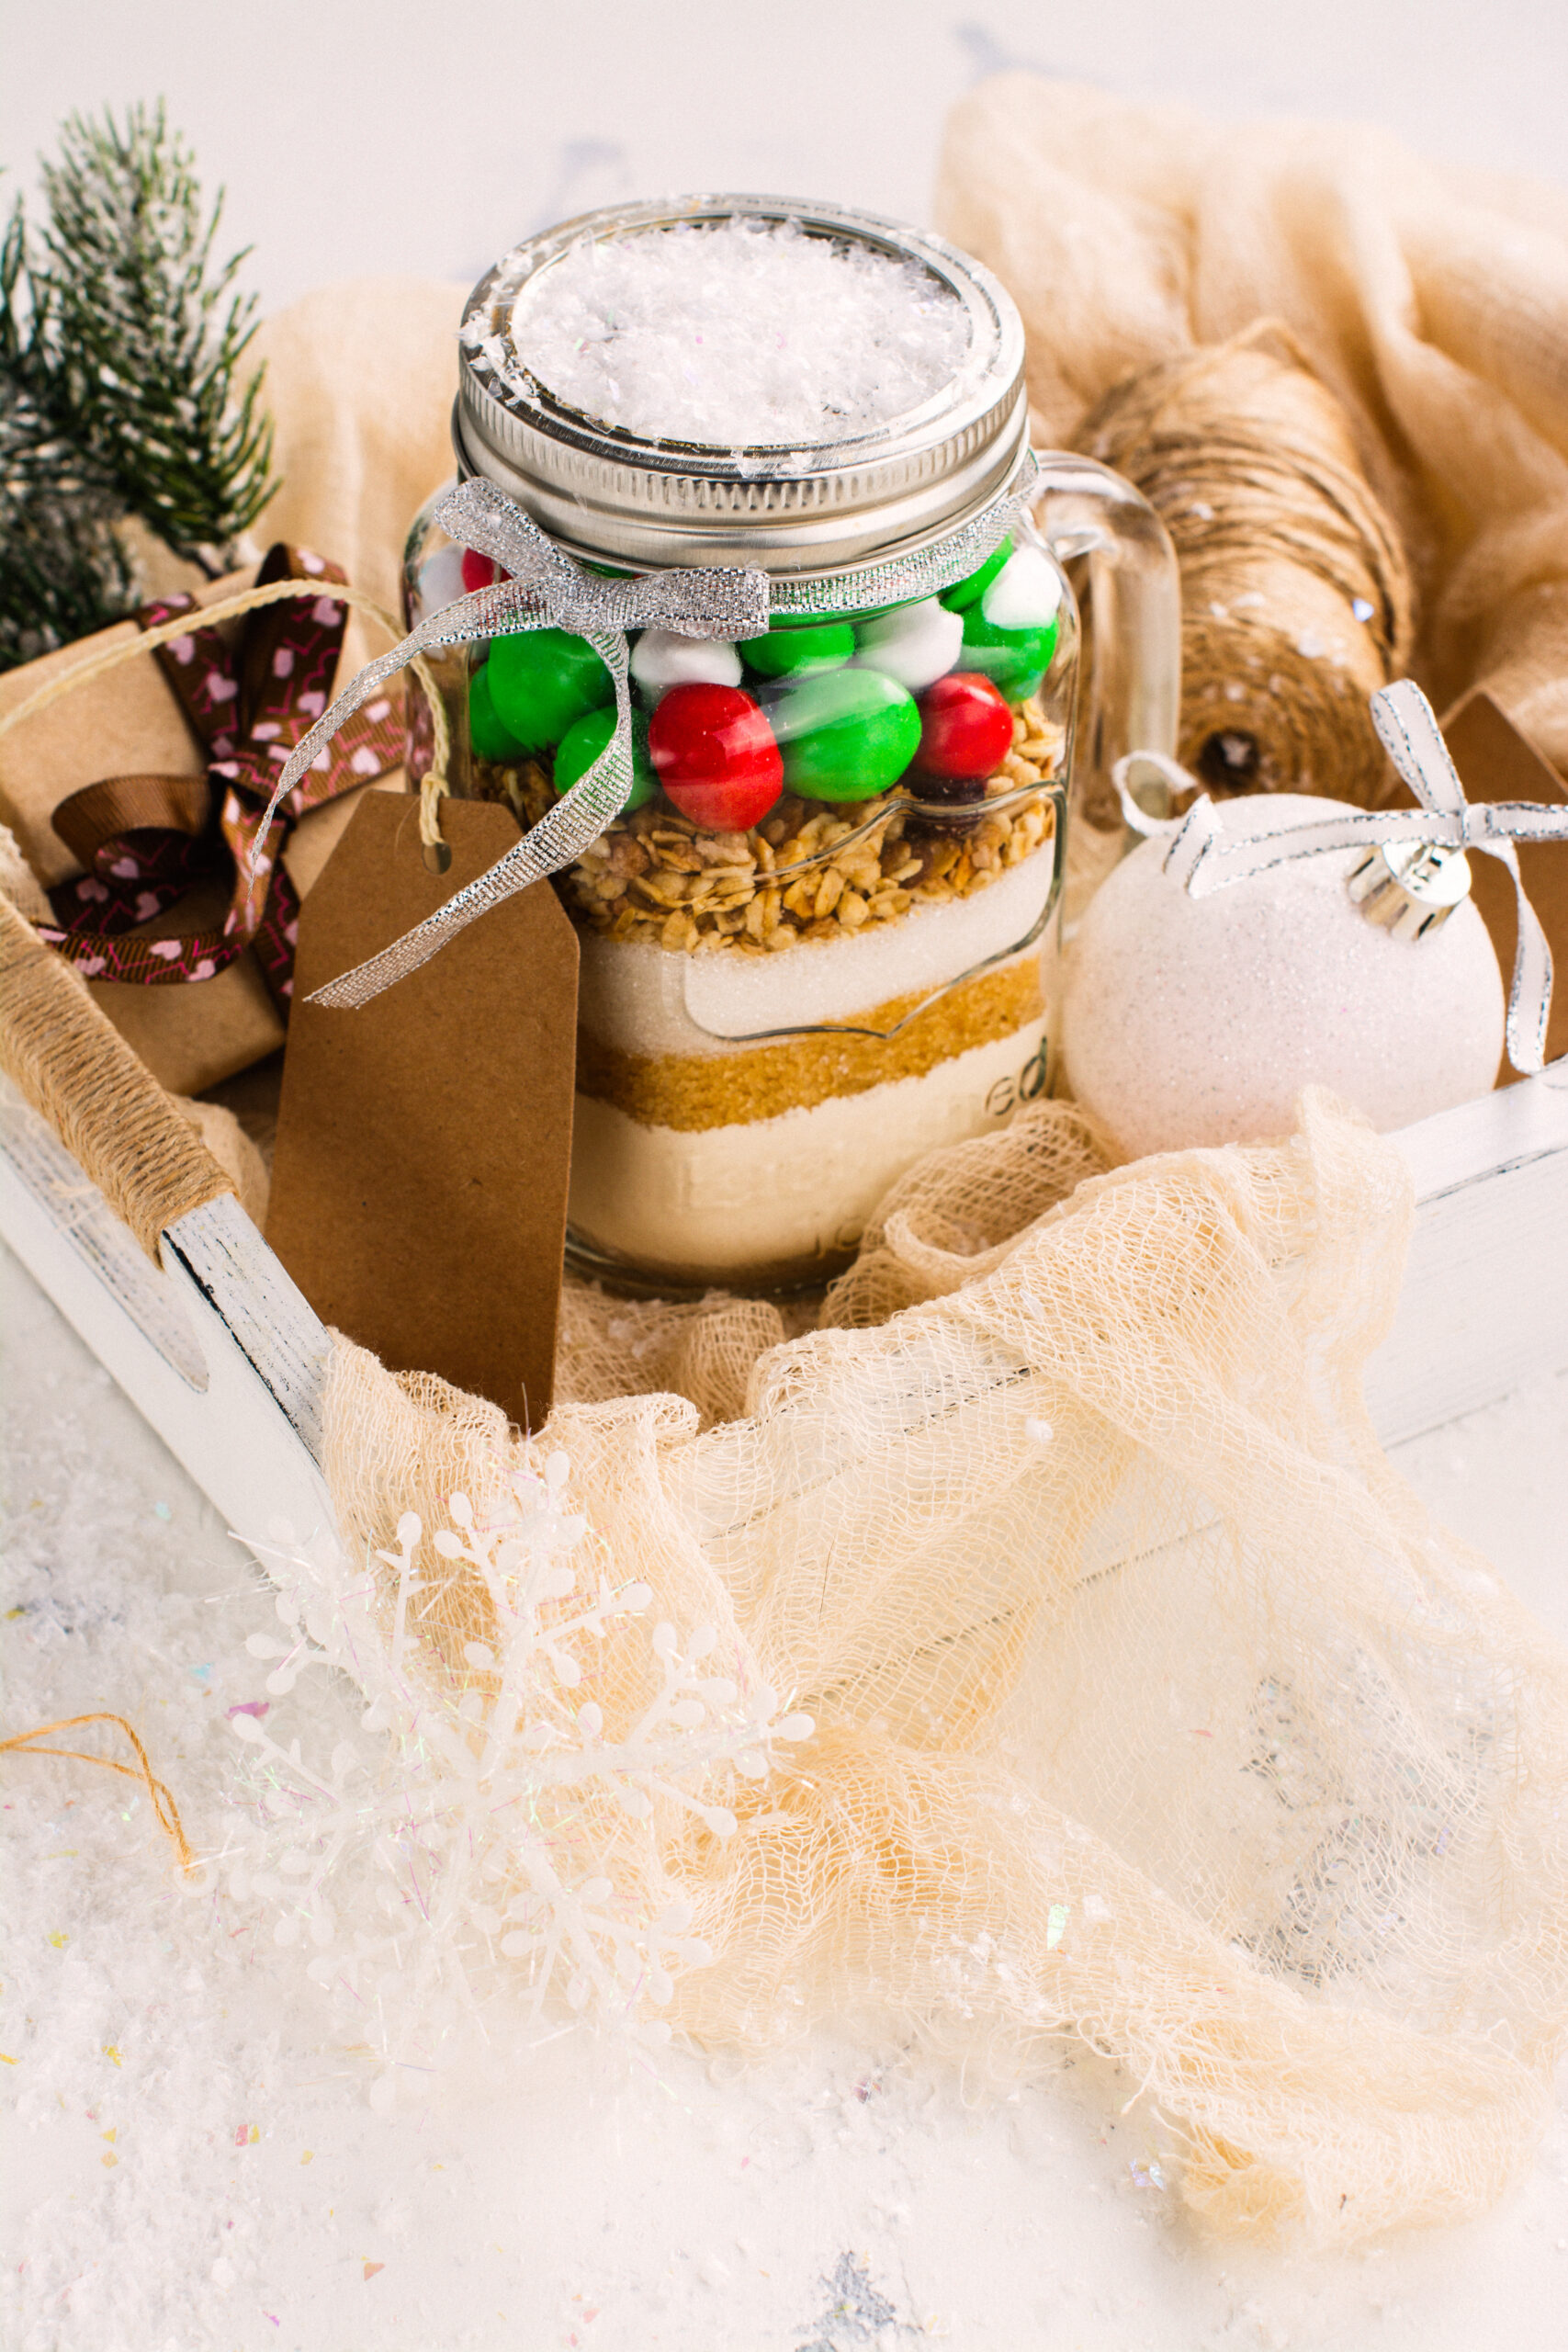 http://www.nikkisplate.com/wp-content/uploads/2022/11/Homemade-Gift-Cookie-Mix-in-a-Jar-4-scaled.jpg